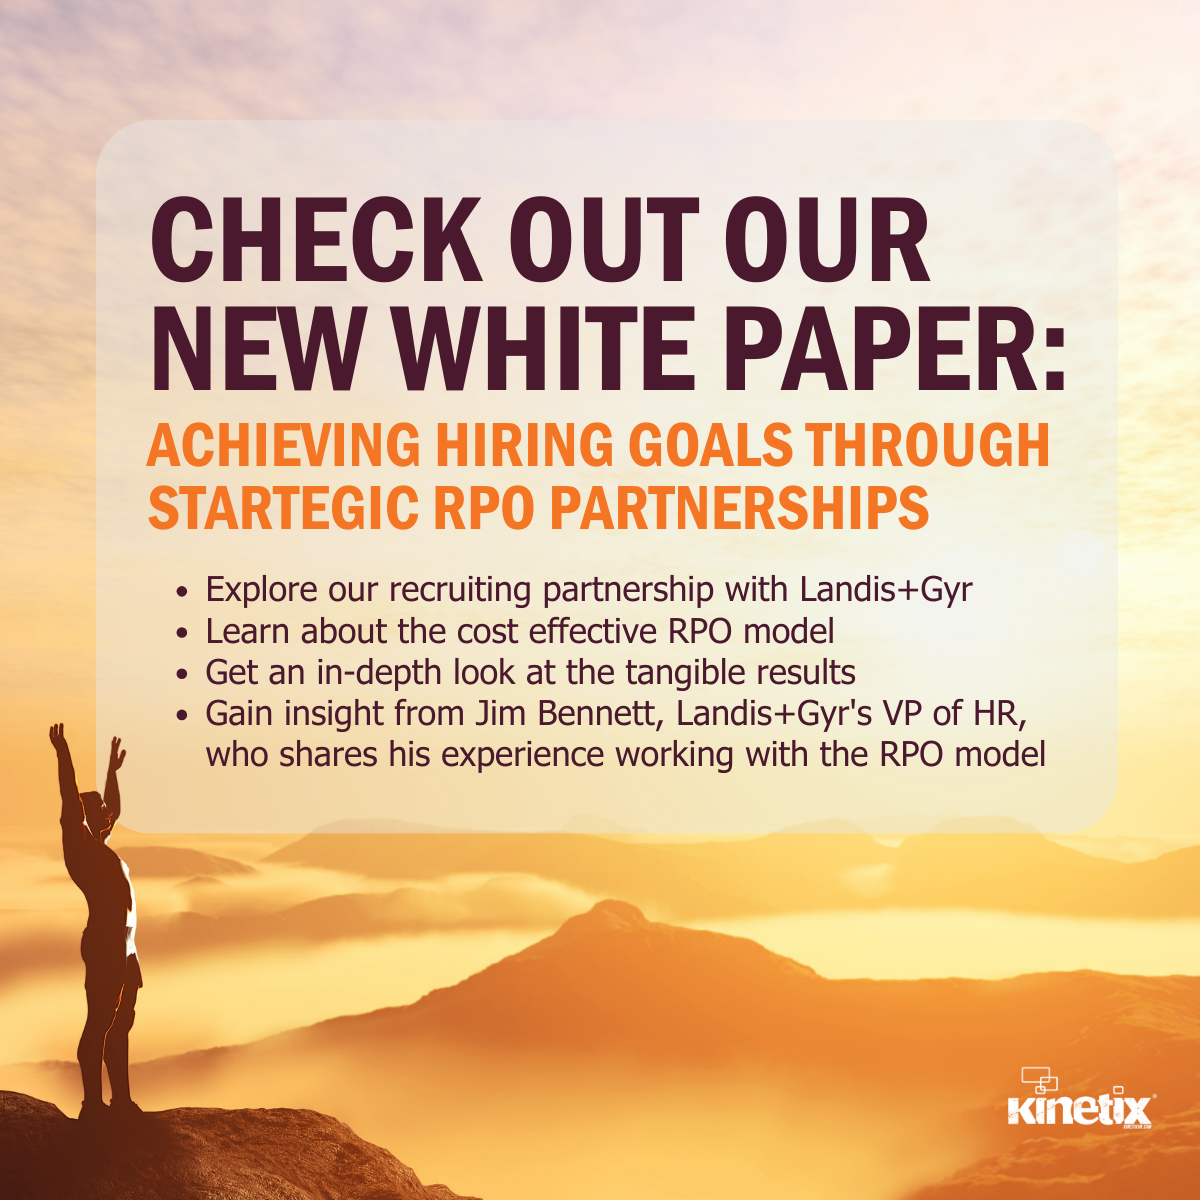 CHECK OUT OUR NEW WHITE PAPER